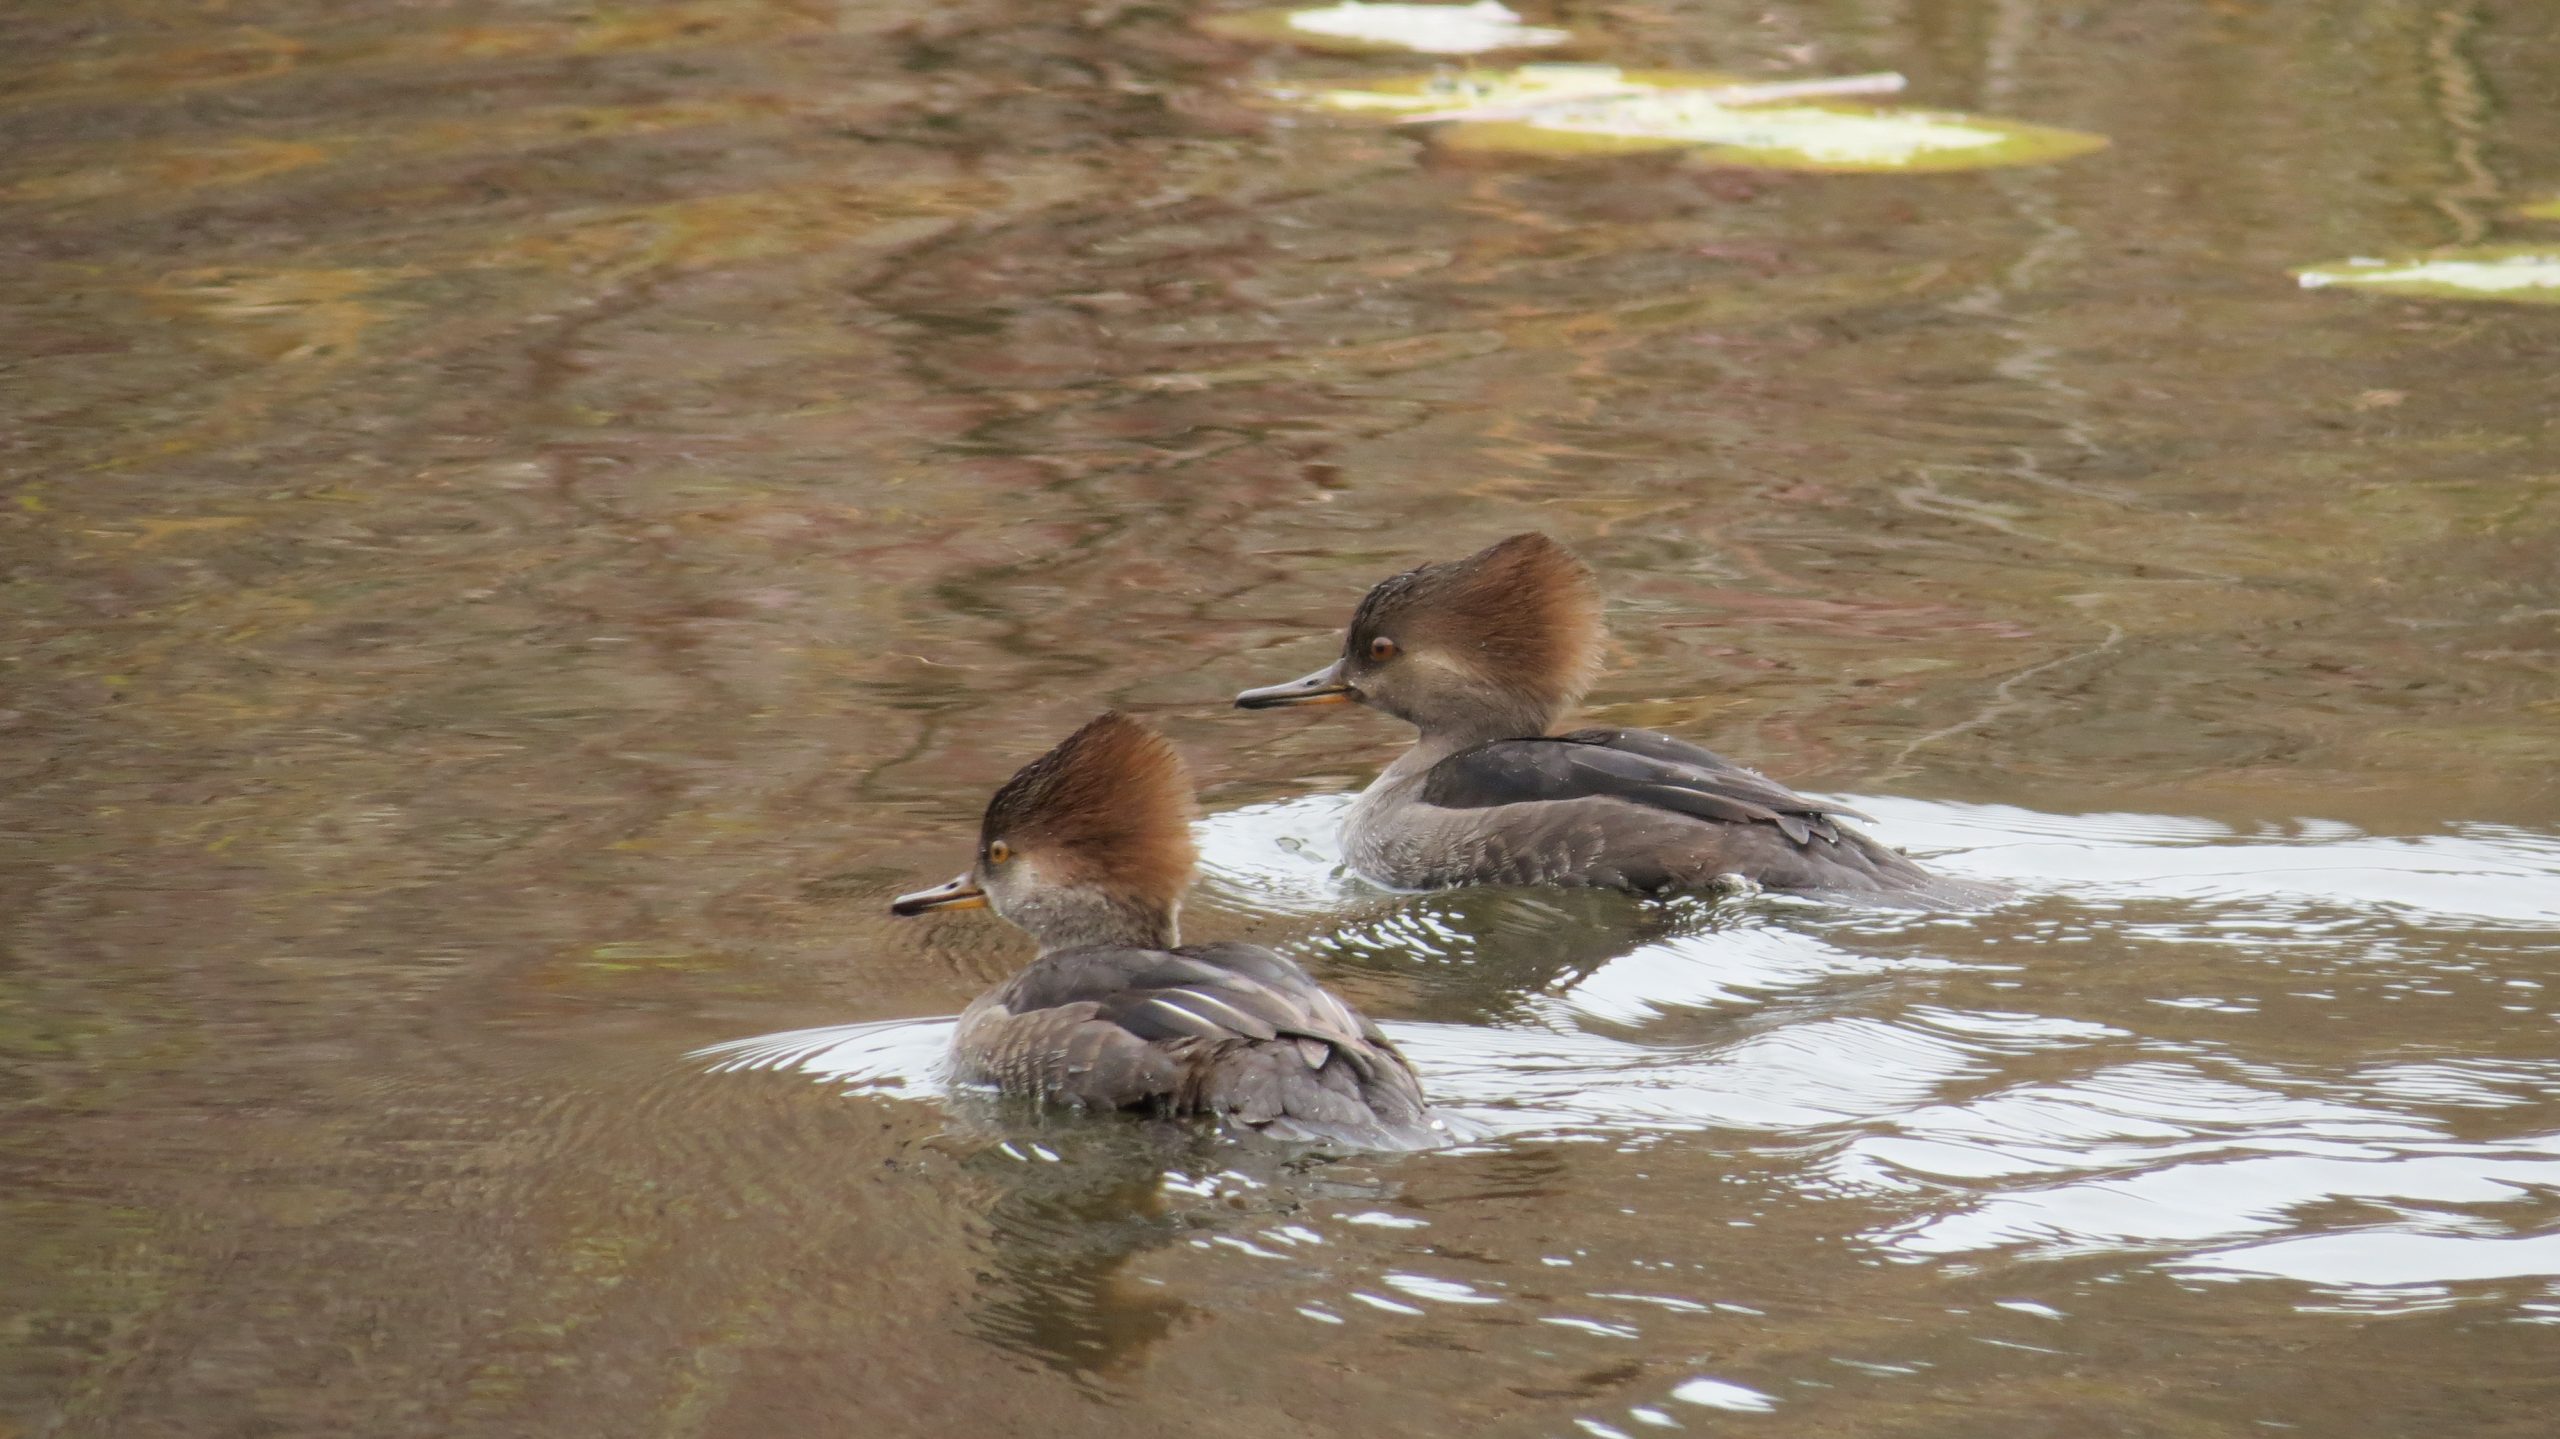 Two female hooded mergansers swimming in a pond at the Don Valley Brick Works Park.